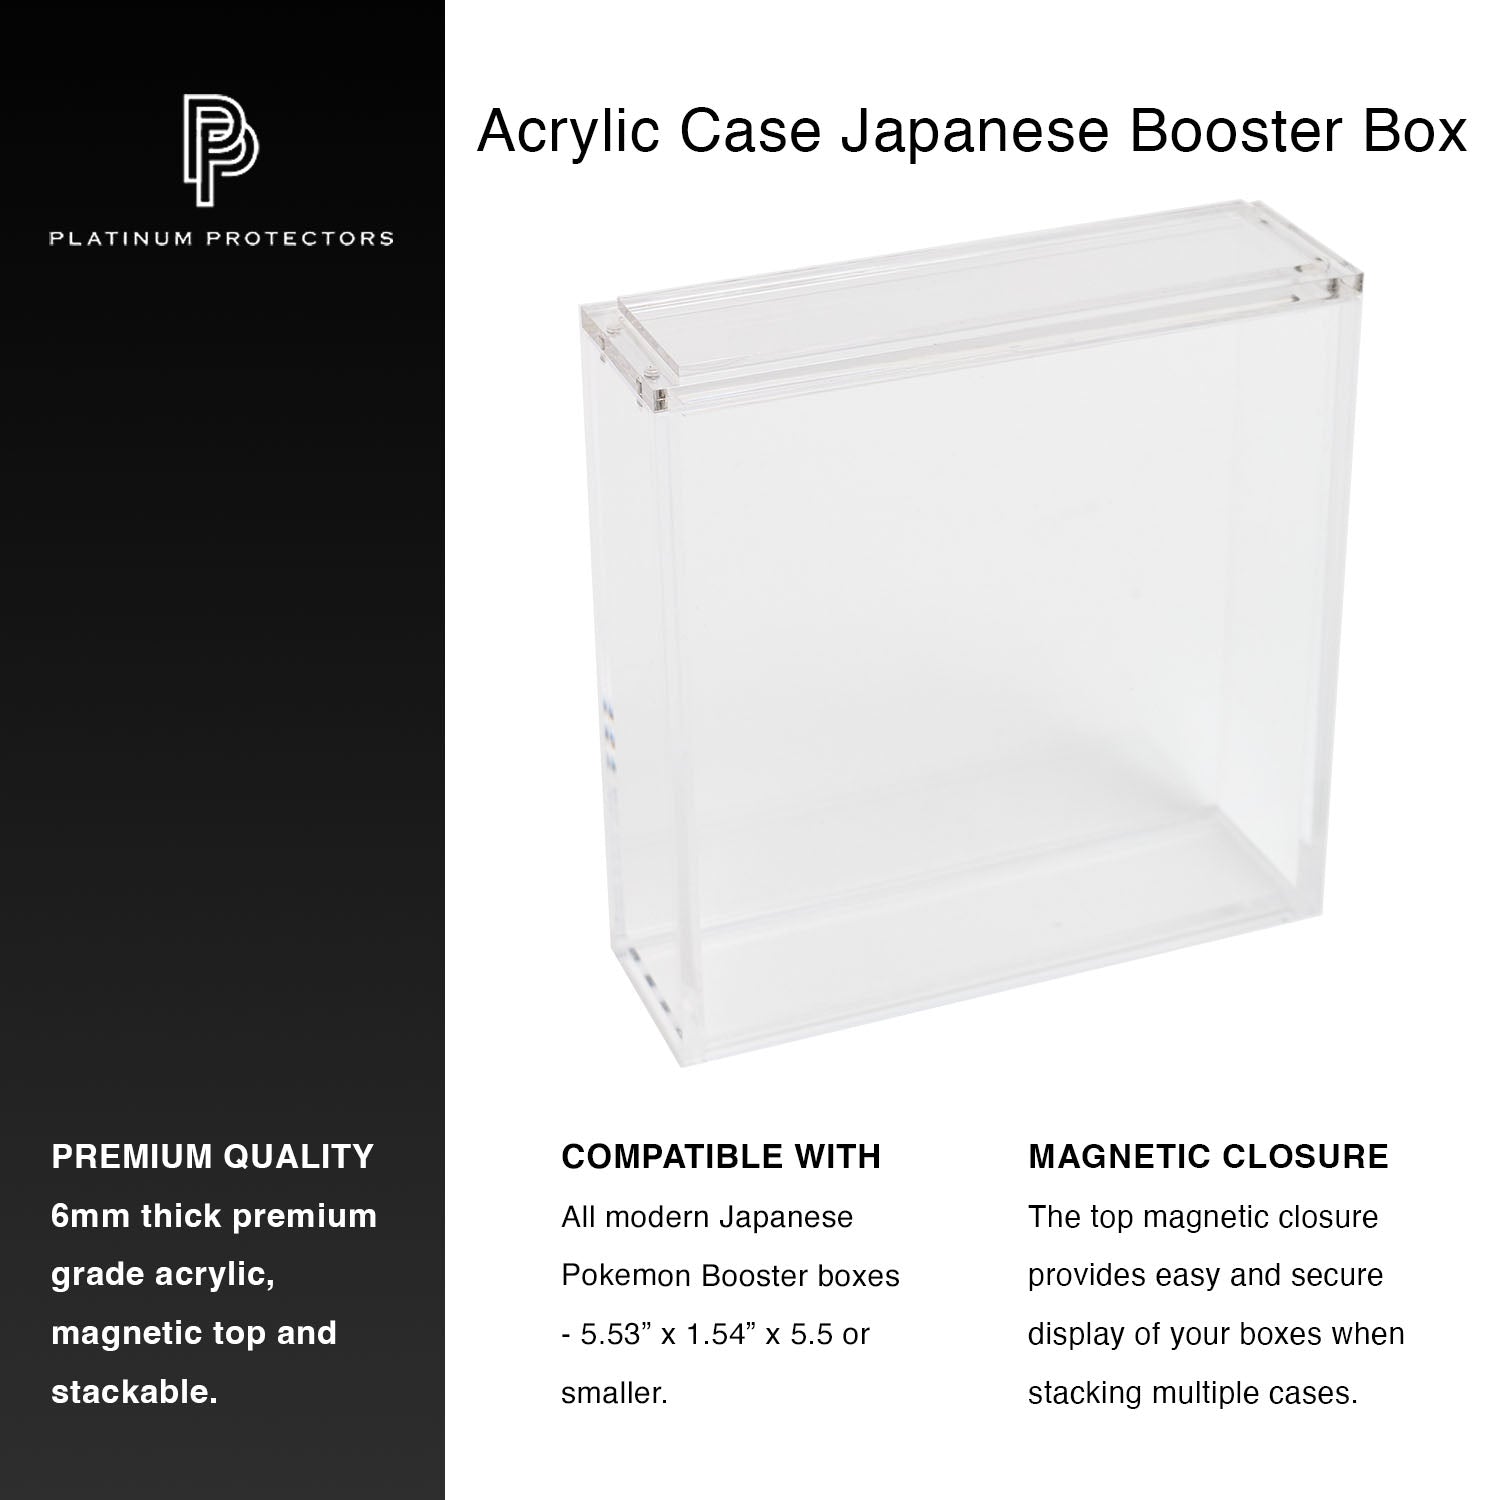 Premium Acrylic Case for Japanese Booster Expansion Box (Large) with Magnetic Top